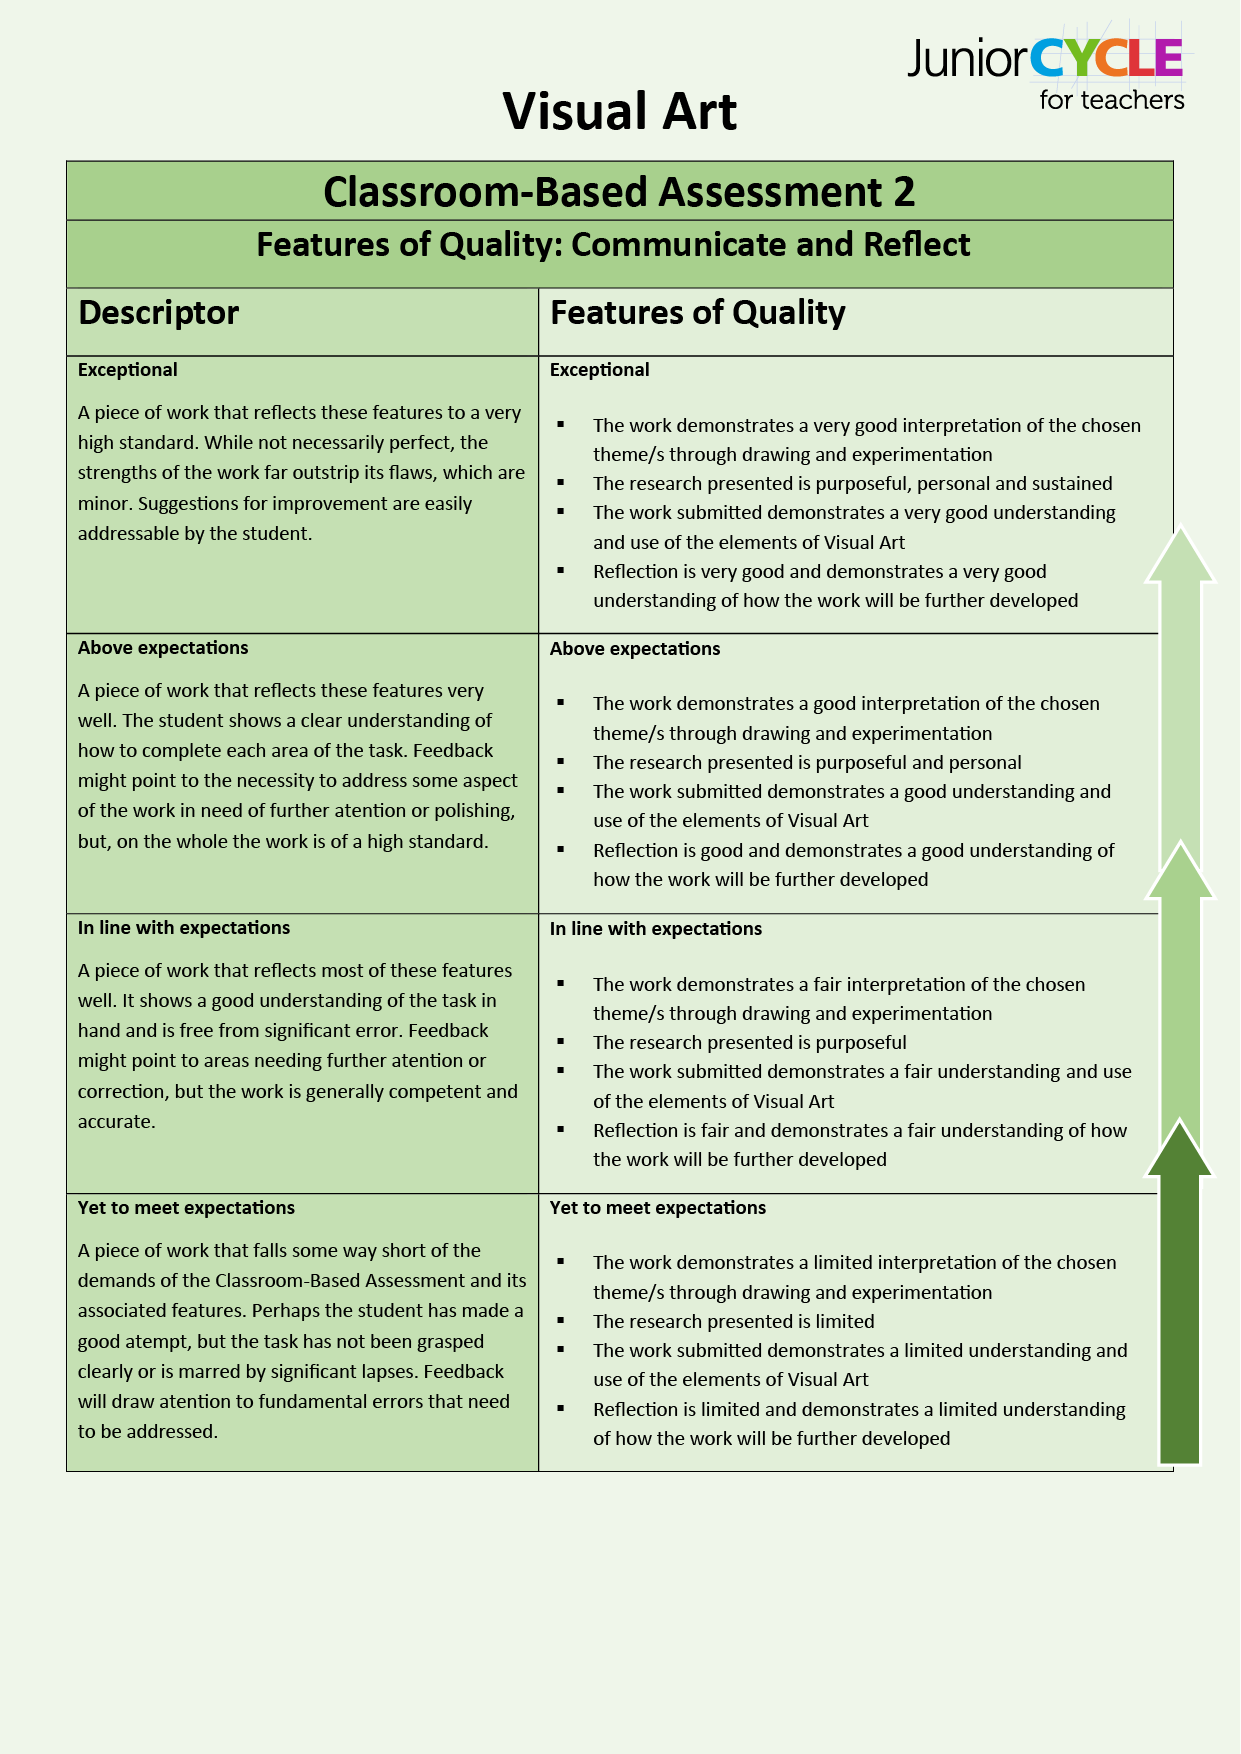 Features of Quality for Classroom-Based Assessment 2